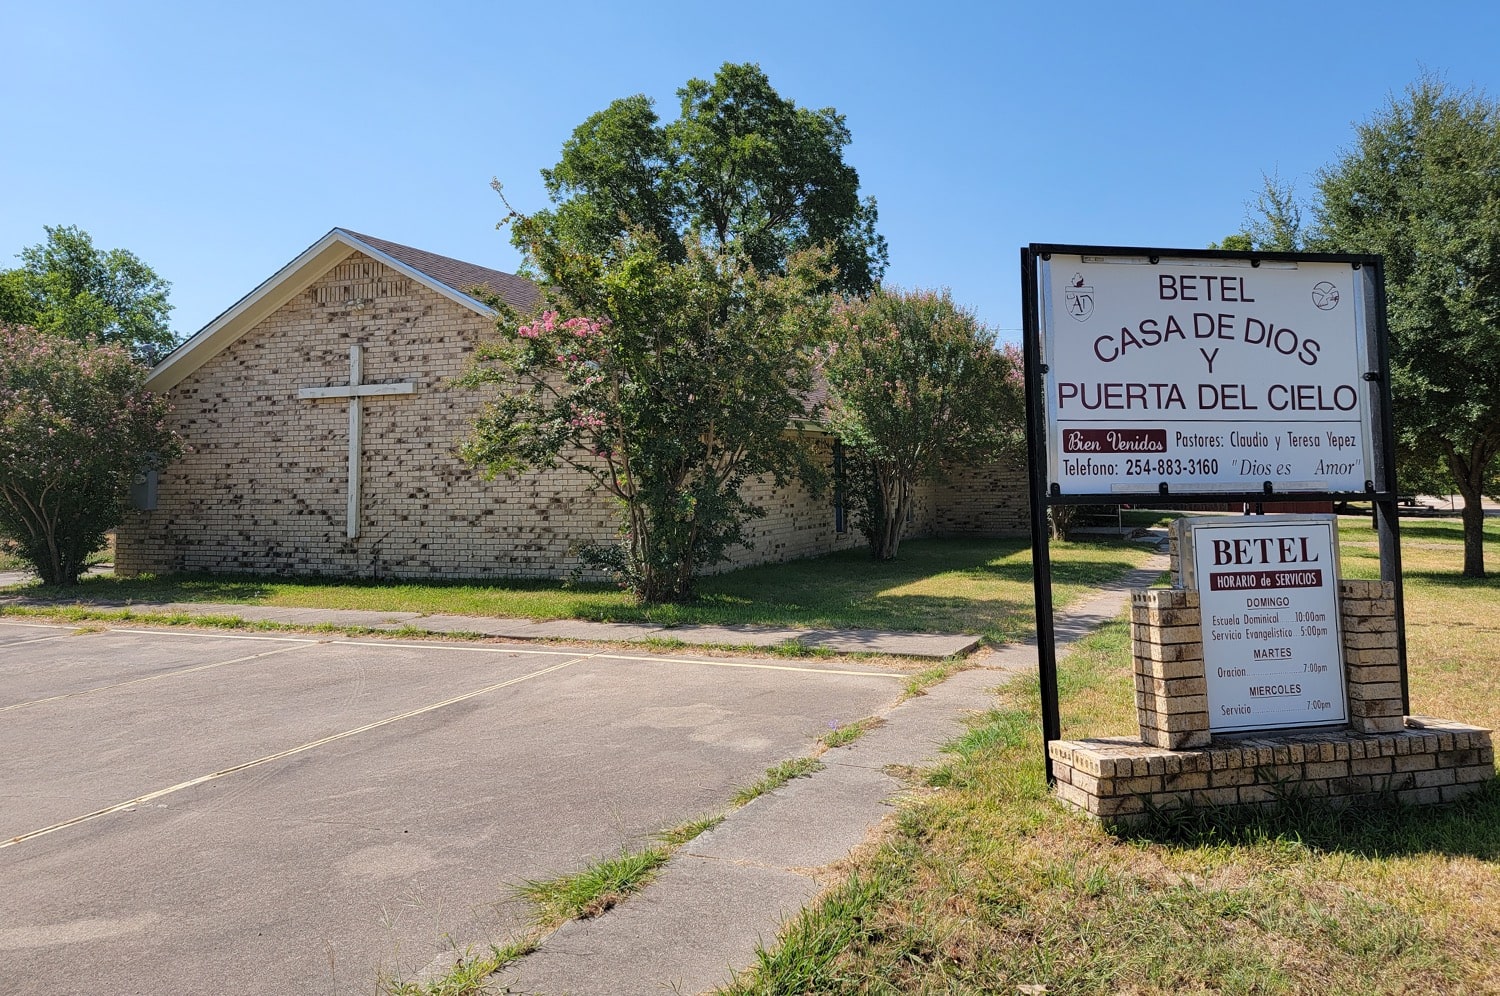 Former Spanish Assembly of God Building in Marlin, Texas